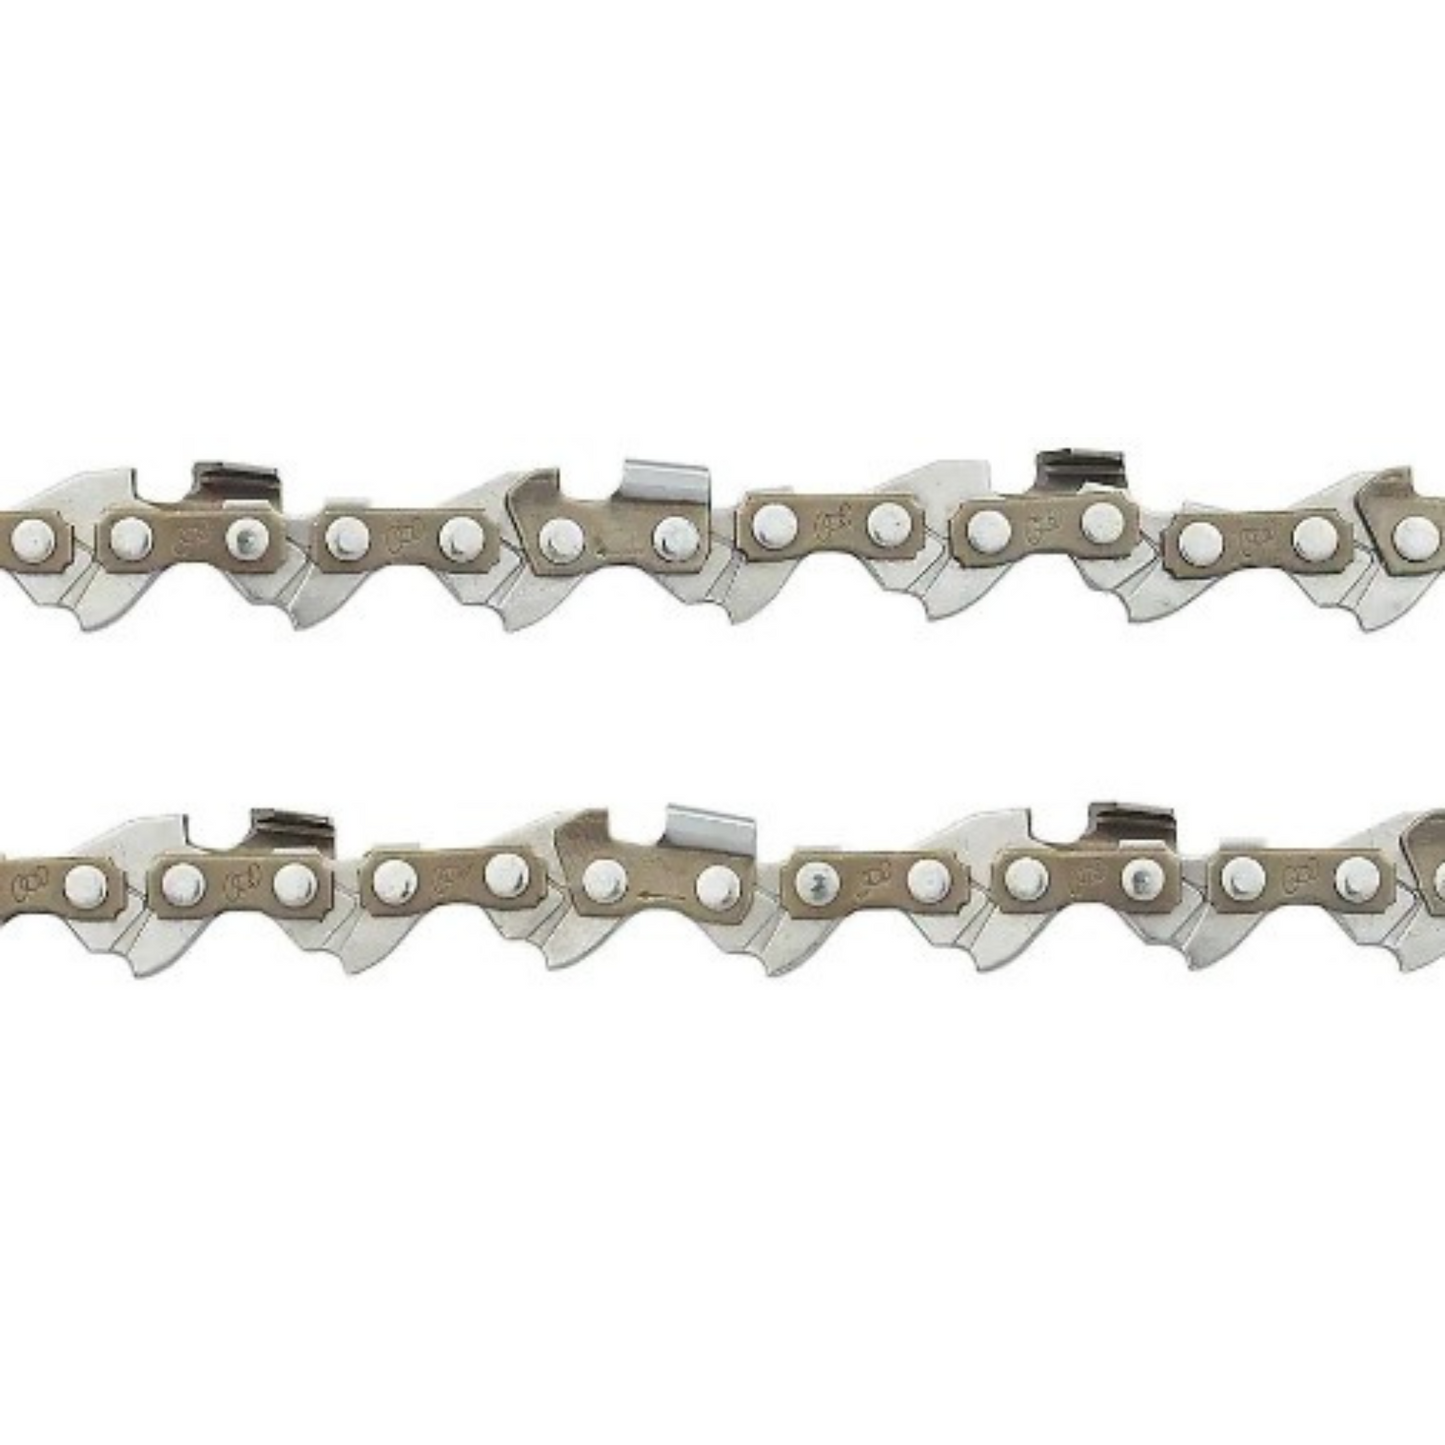 MGP Supply Semi-Chisel Chain Saw Chain Loops - 3/8" Low Profile - .050 Gauge - Non-Safety